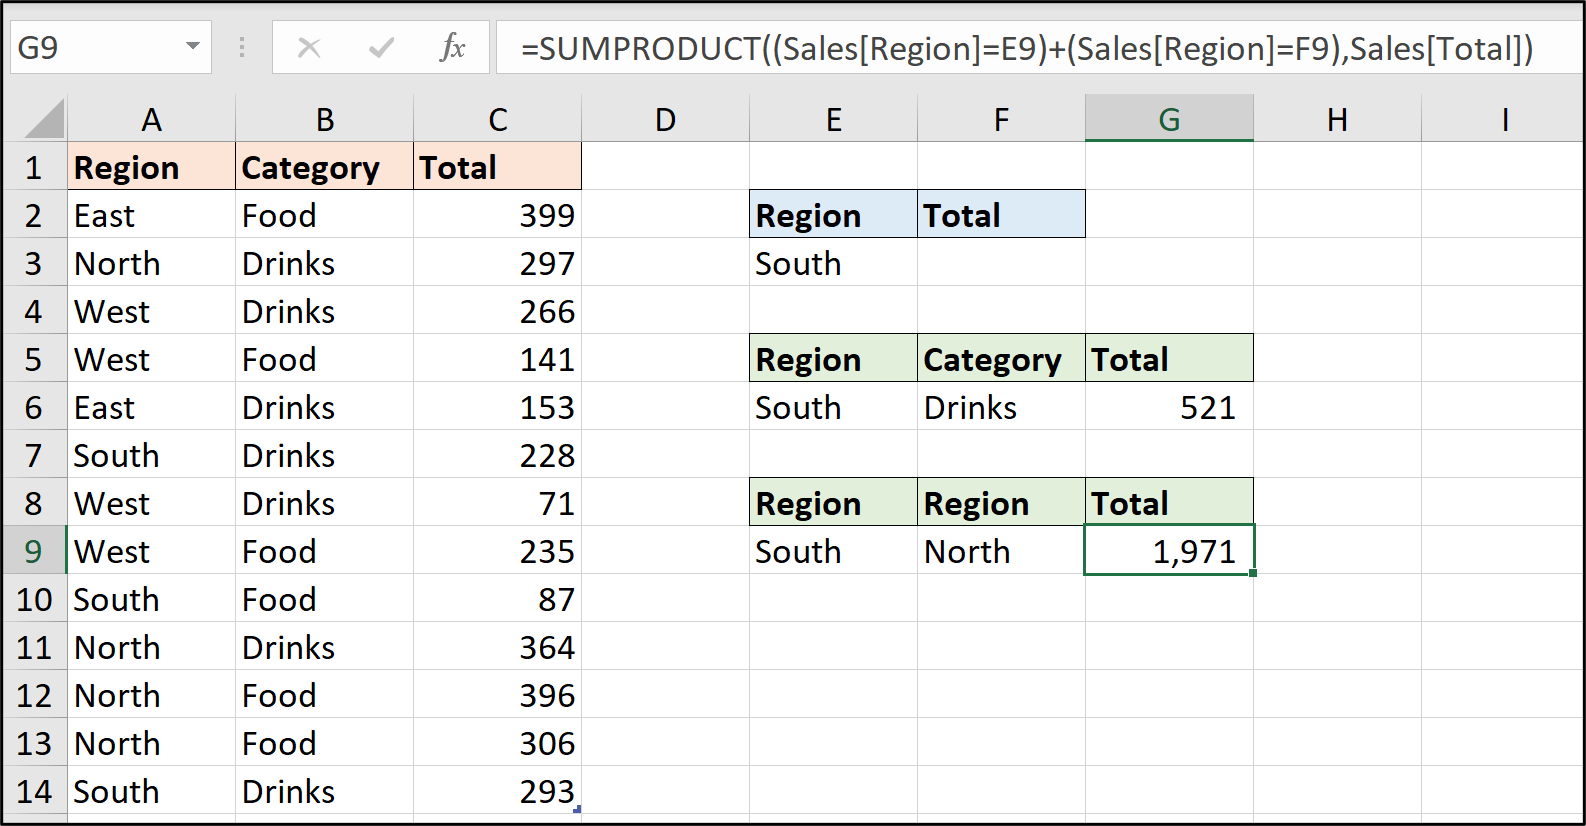 The or logic being used with the SUMPRODUCT function in Excel